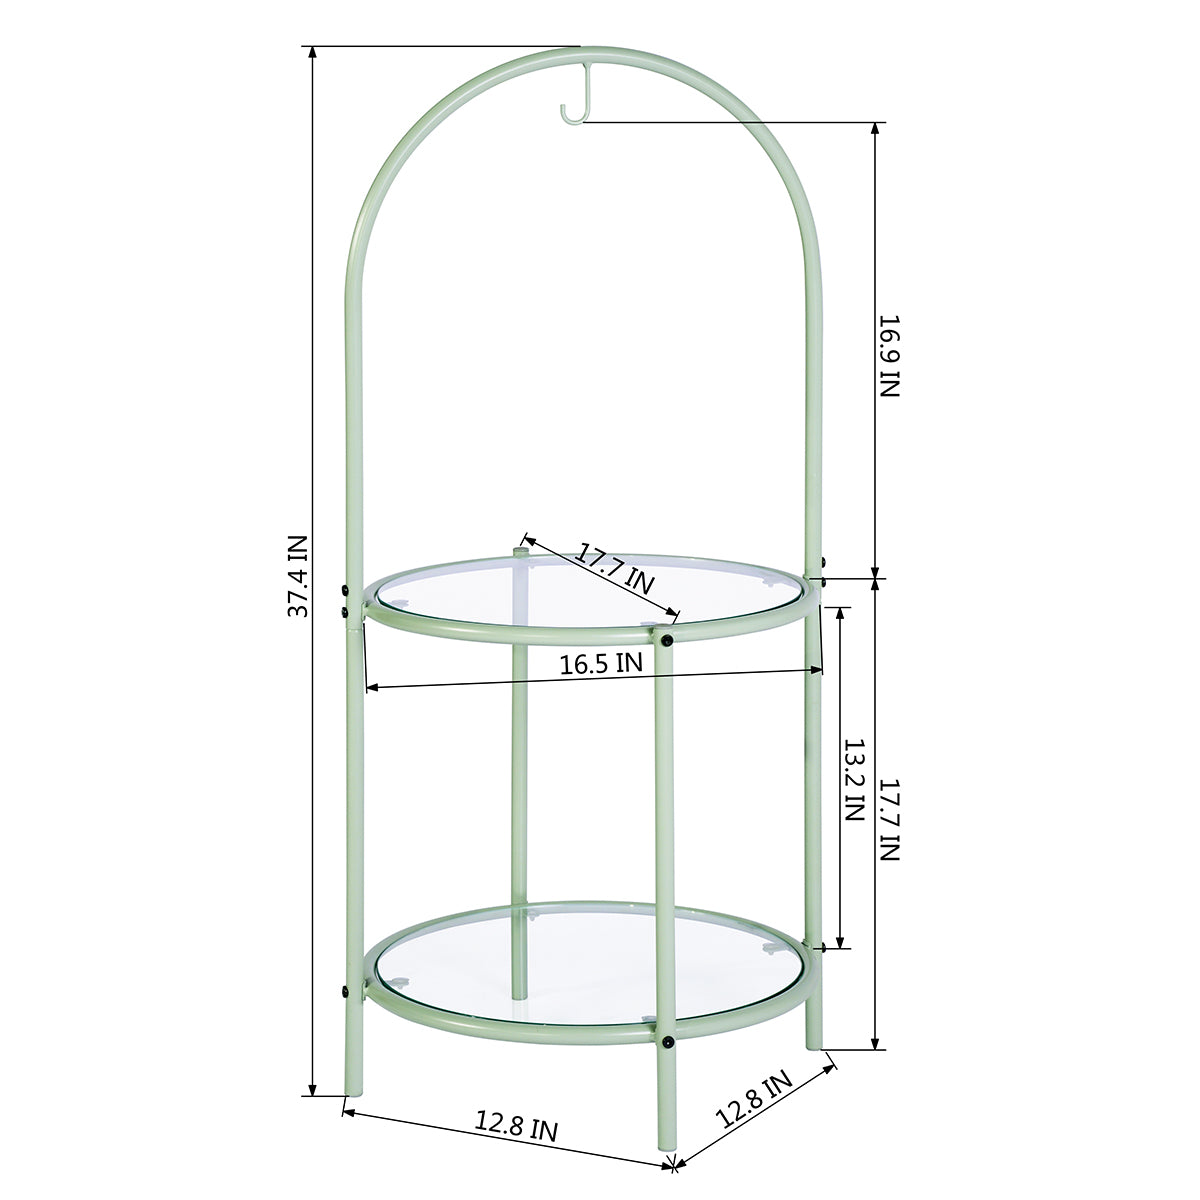 Glass Top End Table with Storage,Round Multi-Tiered Plant Stand